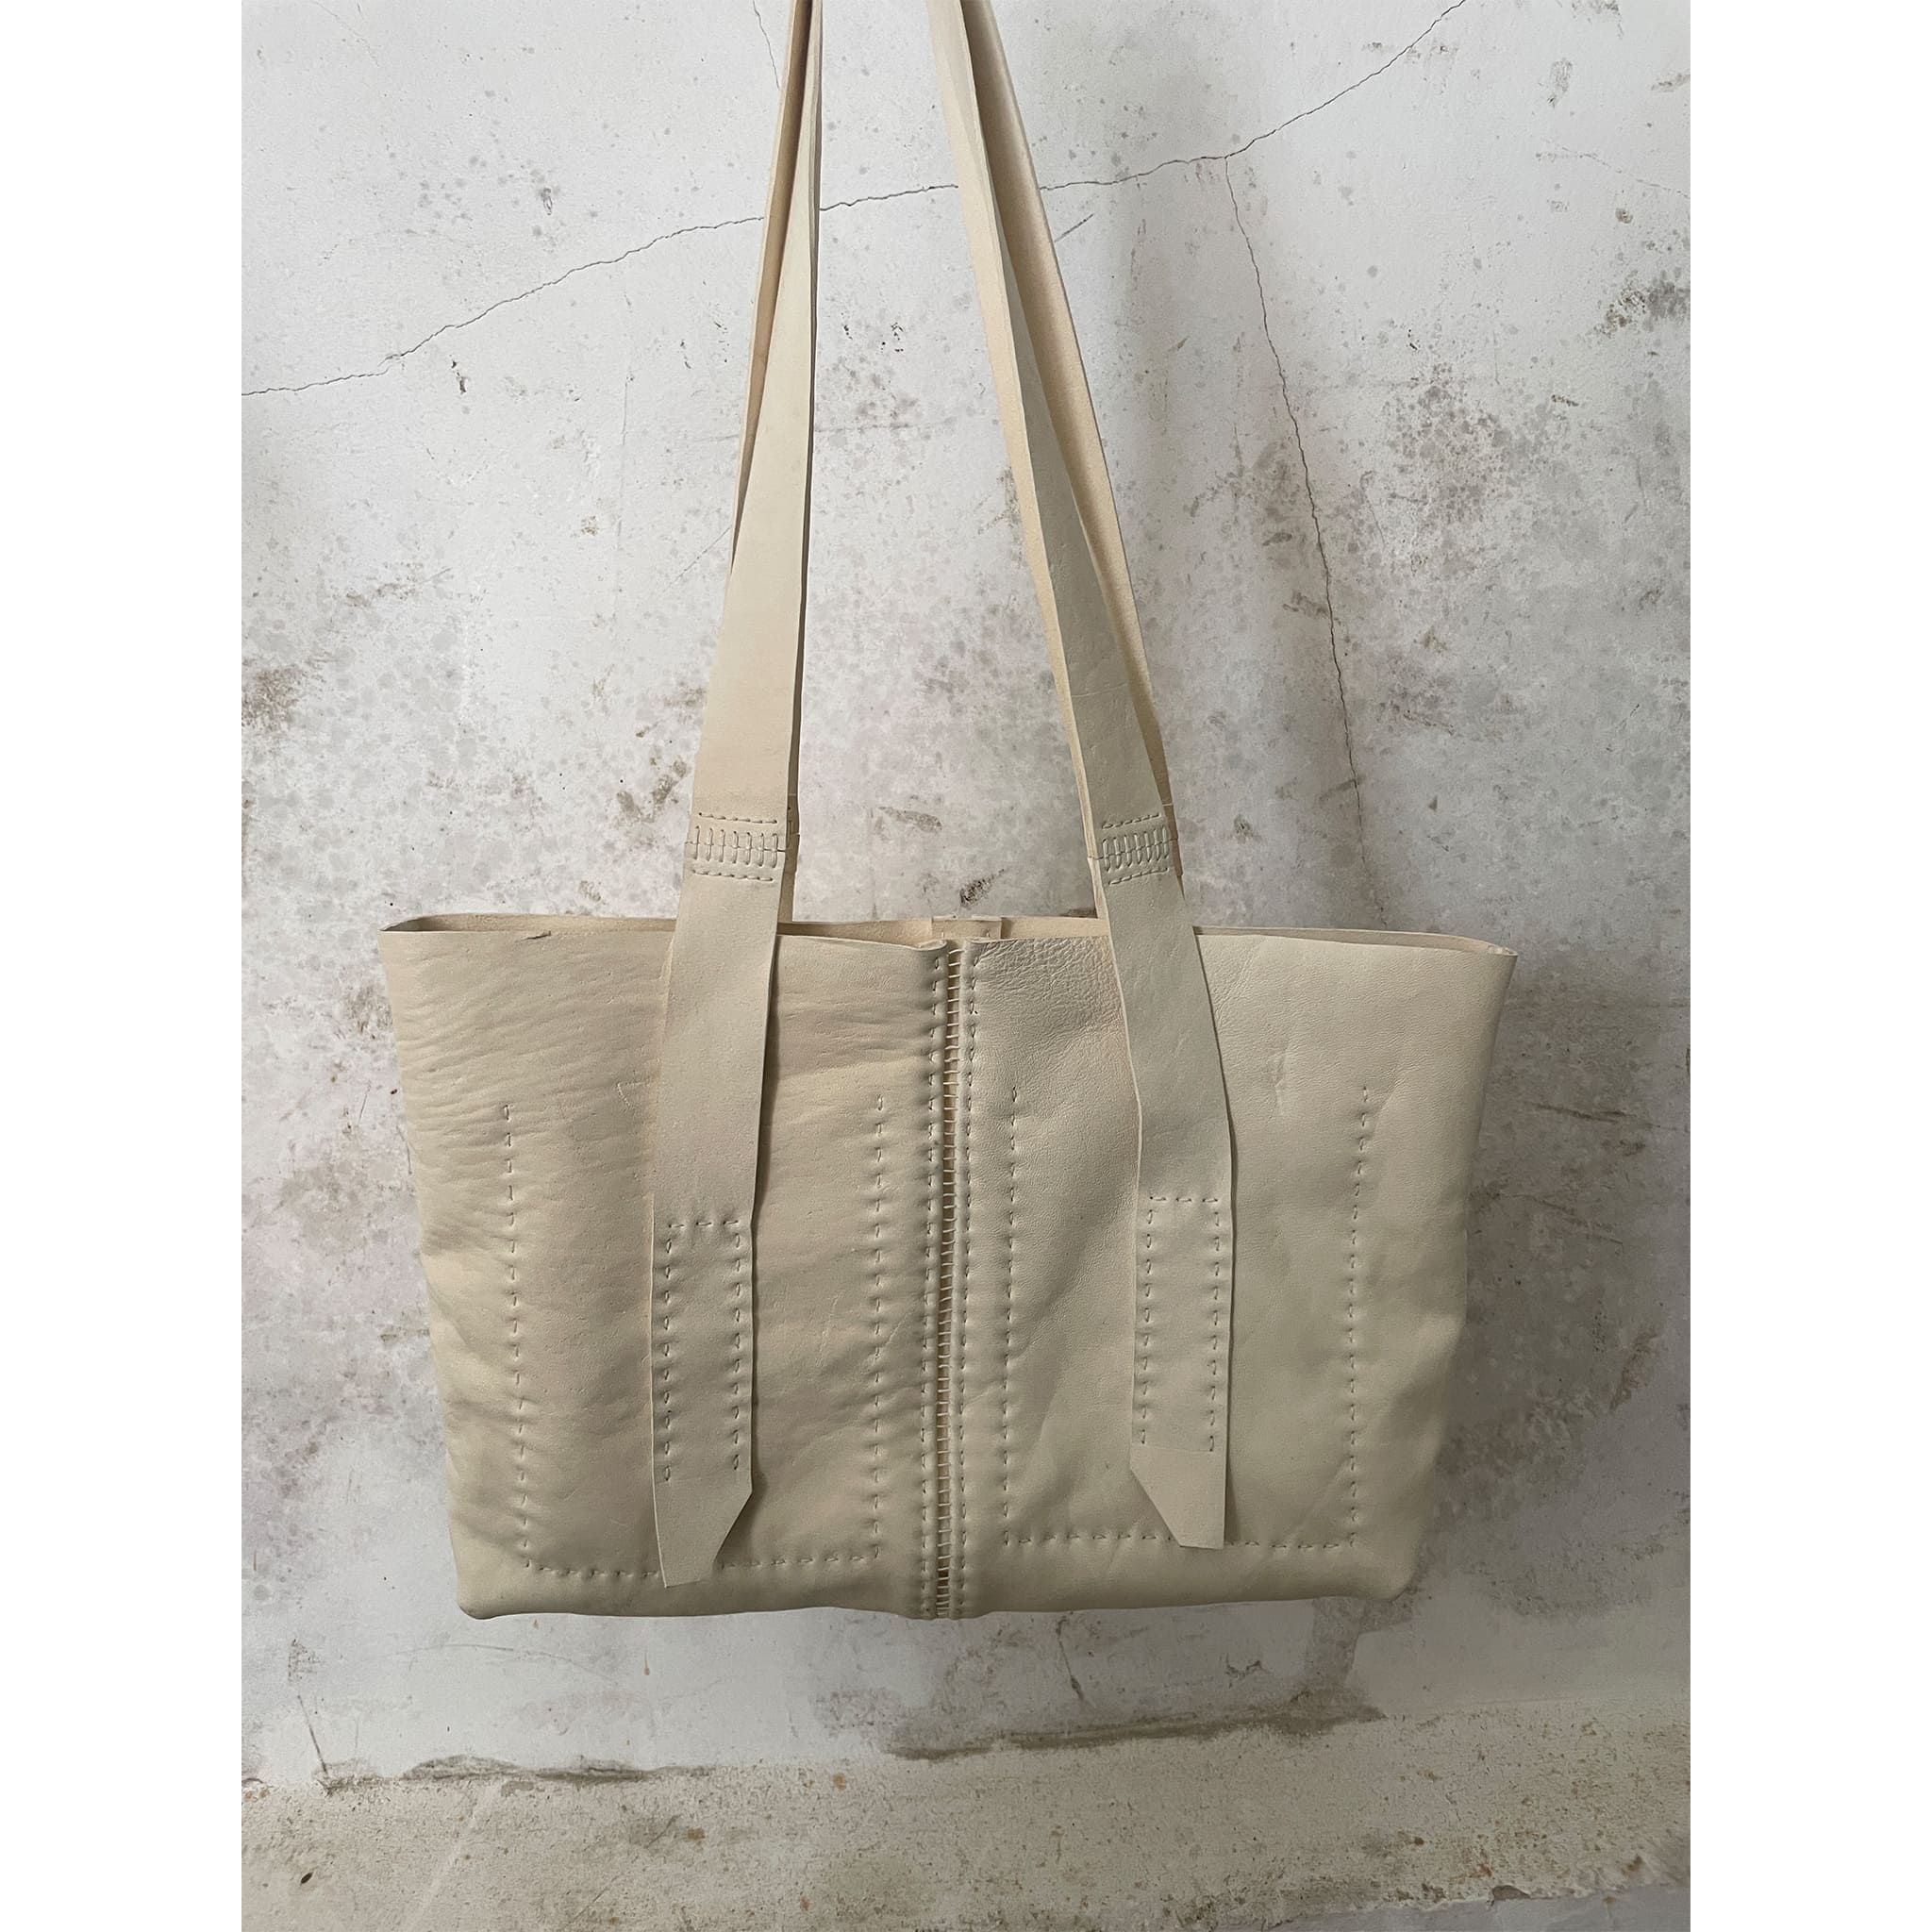 white horse culatta leather city shopper bag entirely hand stitched with an open seam construction and multiple interior pockets from uk based leather studio atelier skn.